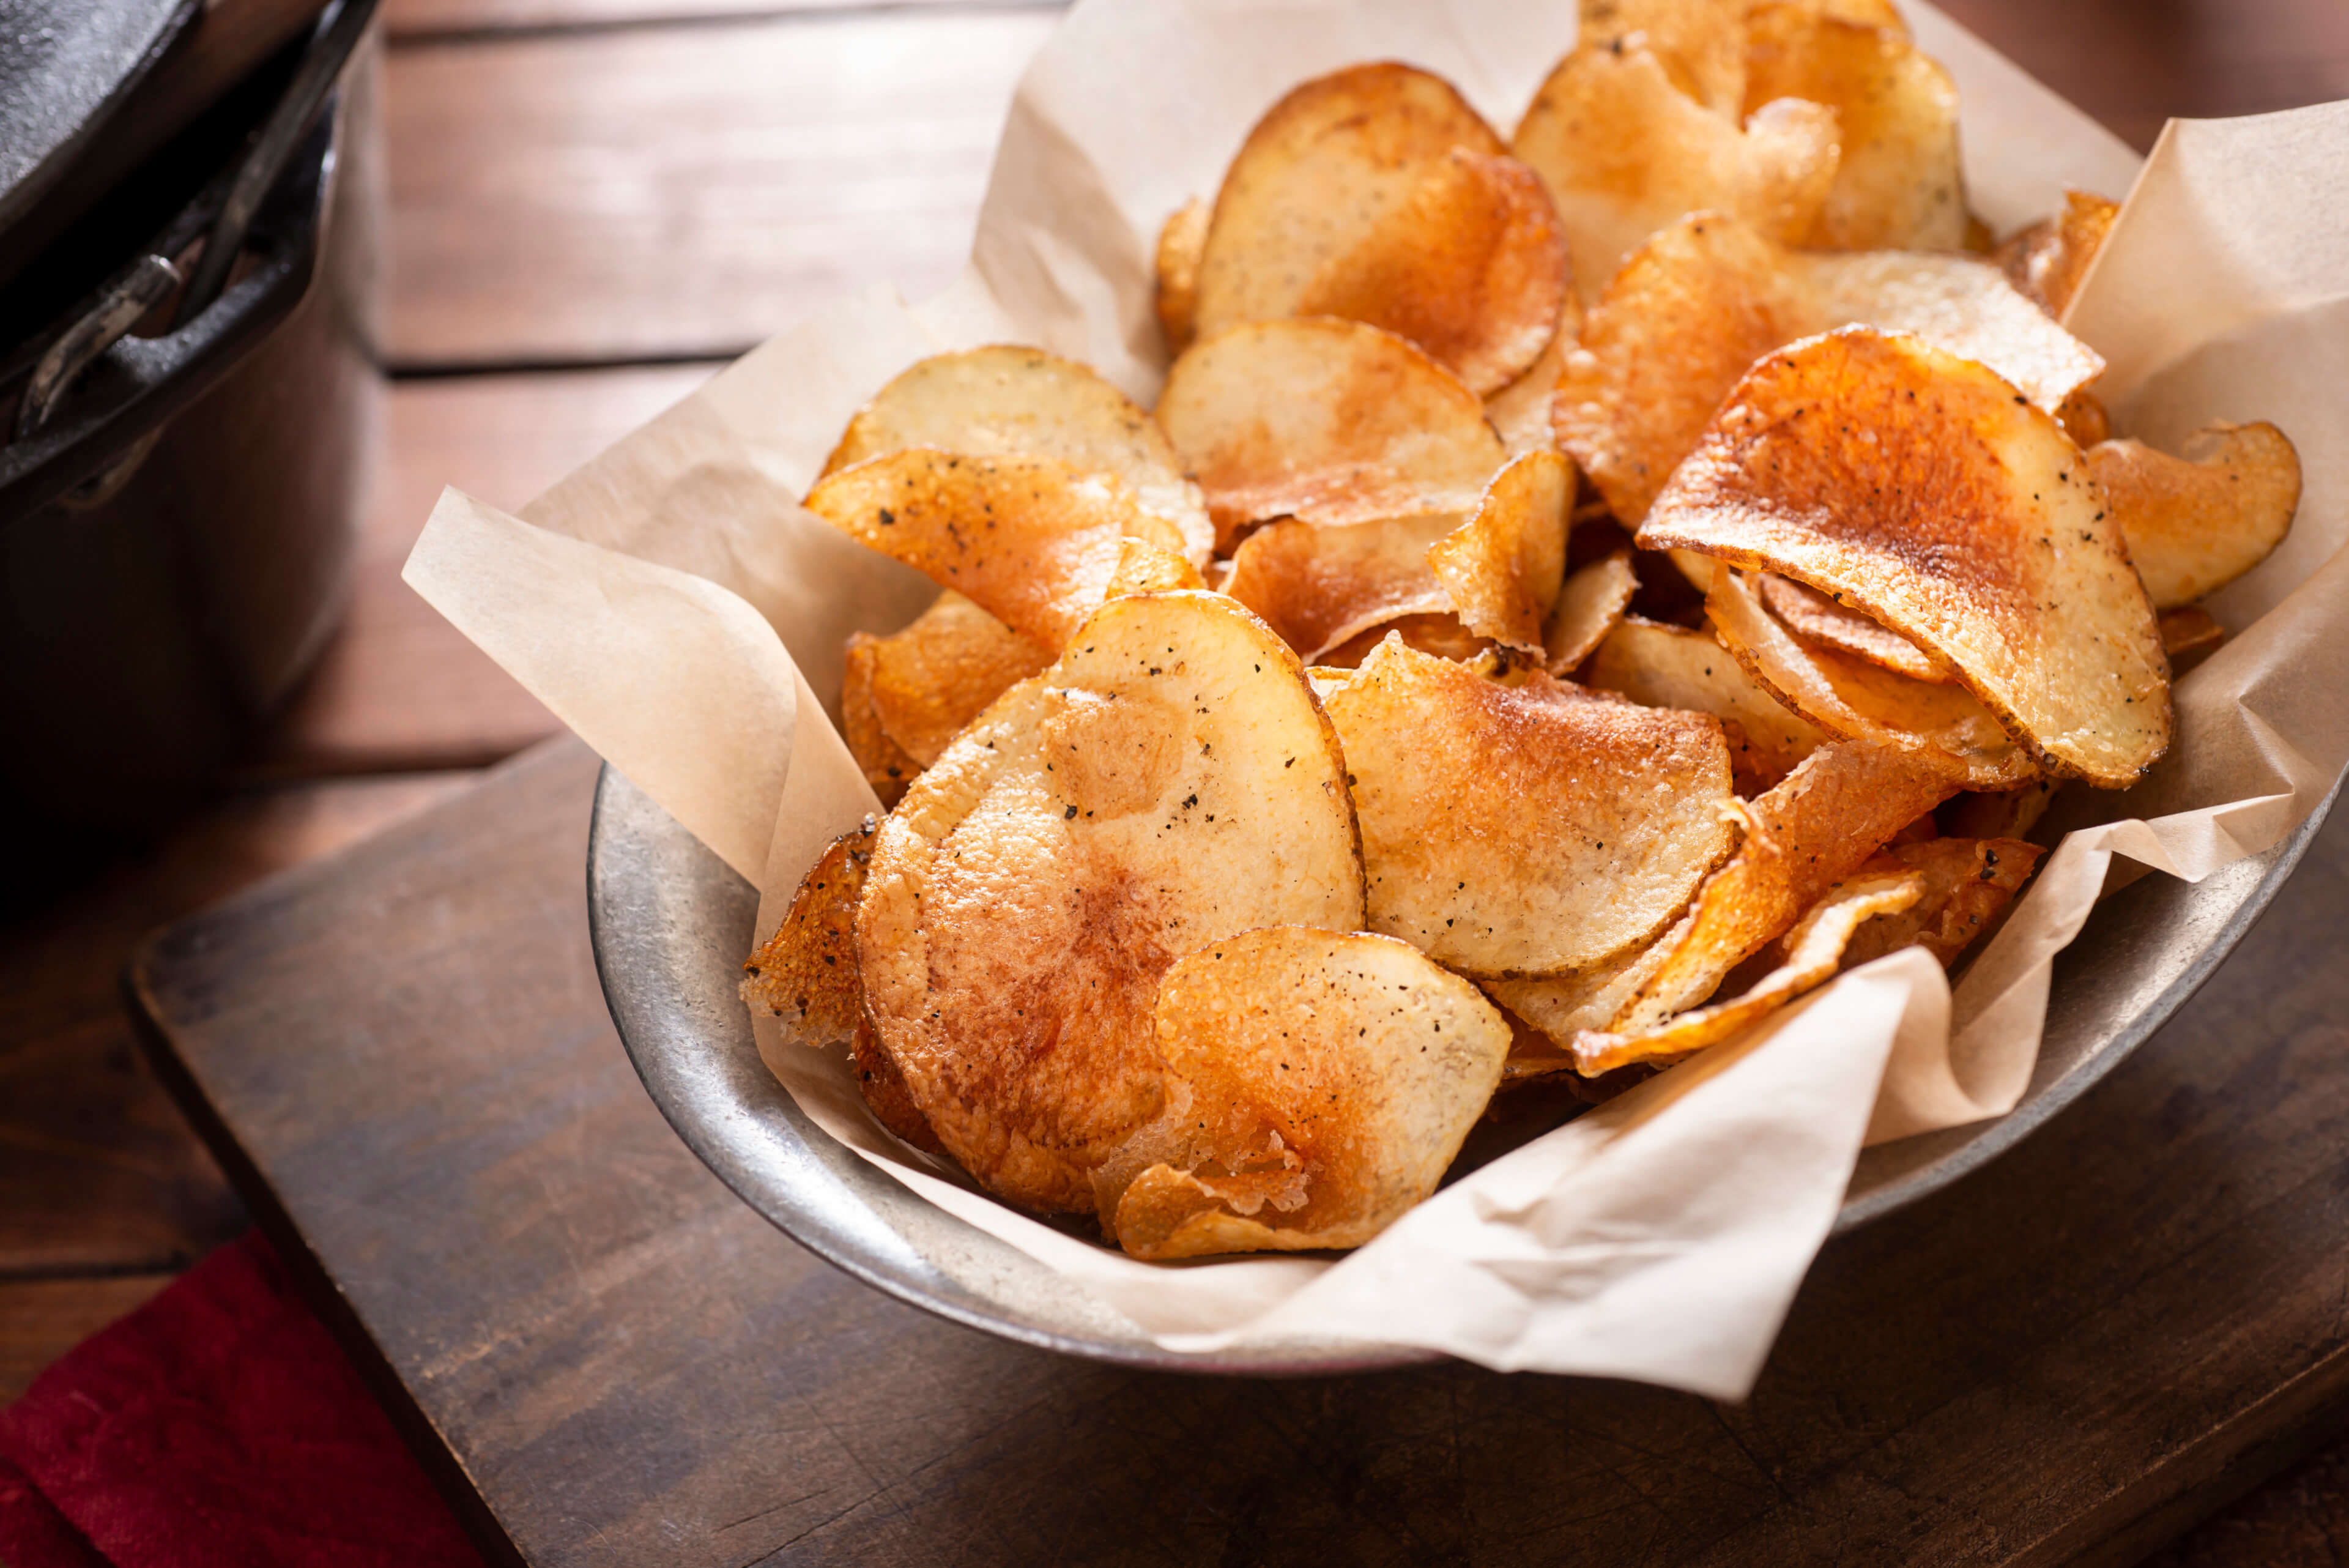 You'll love these delicious homemade potato chips.